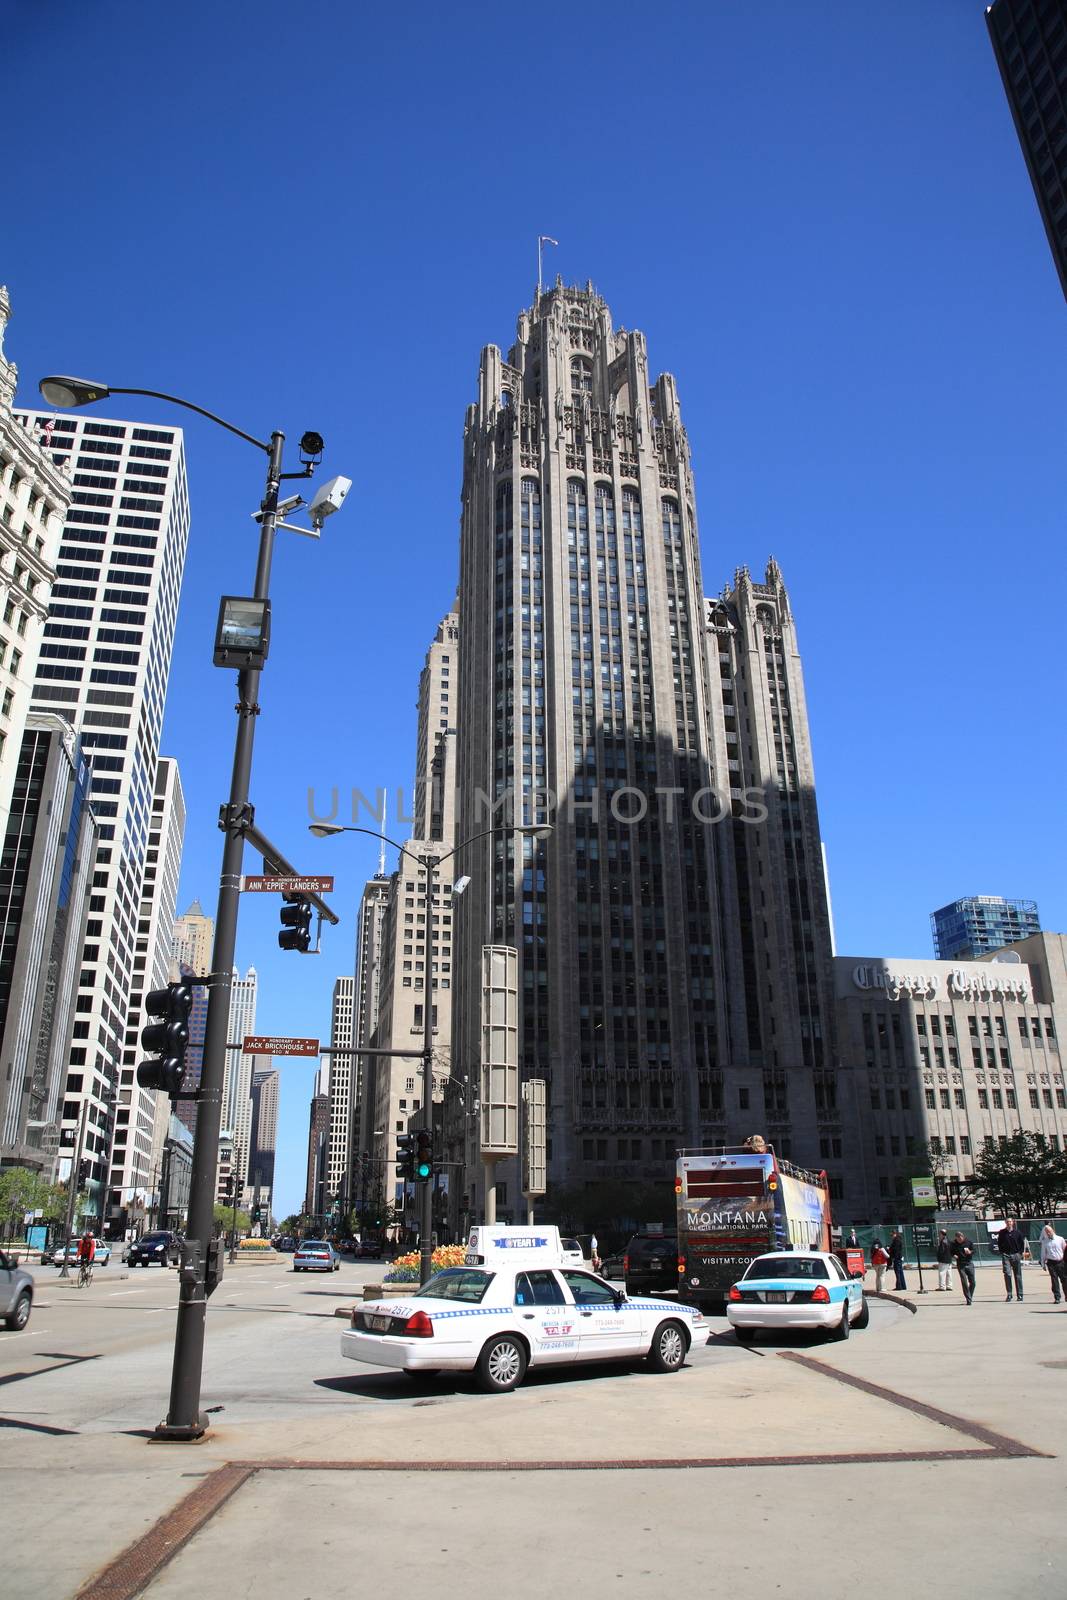 Michigan Avenue in Chicago, with the Tribune Building and pedestrians.